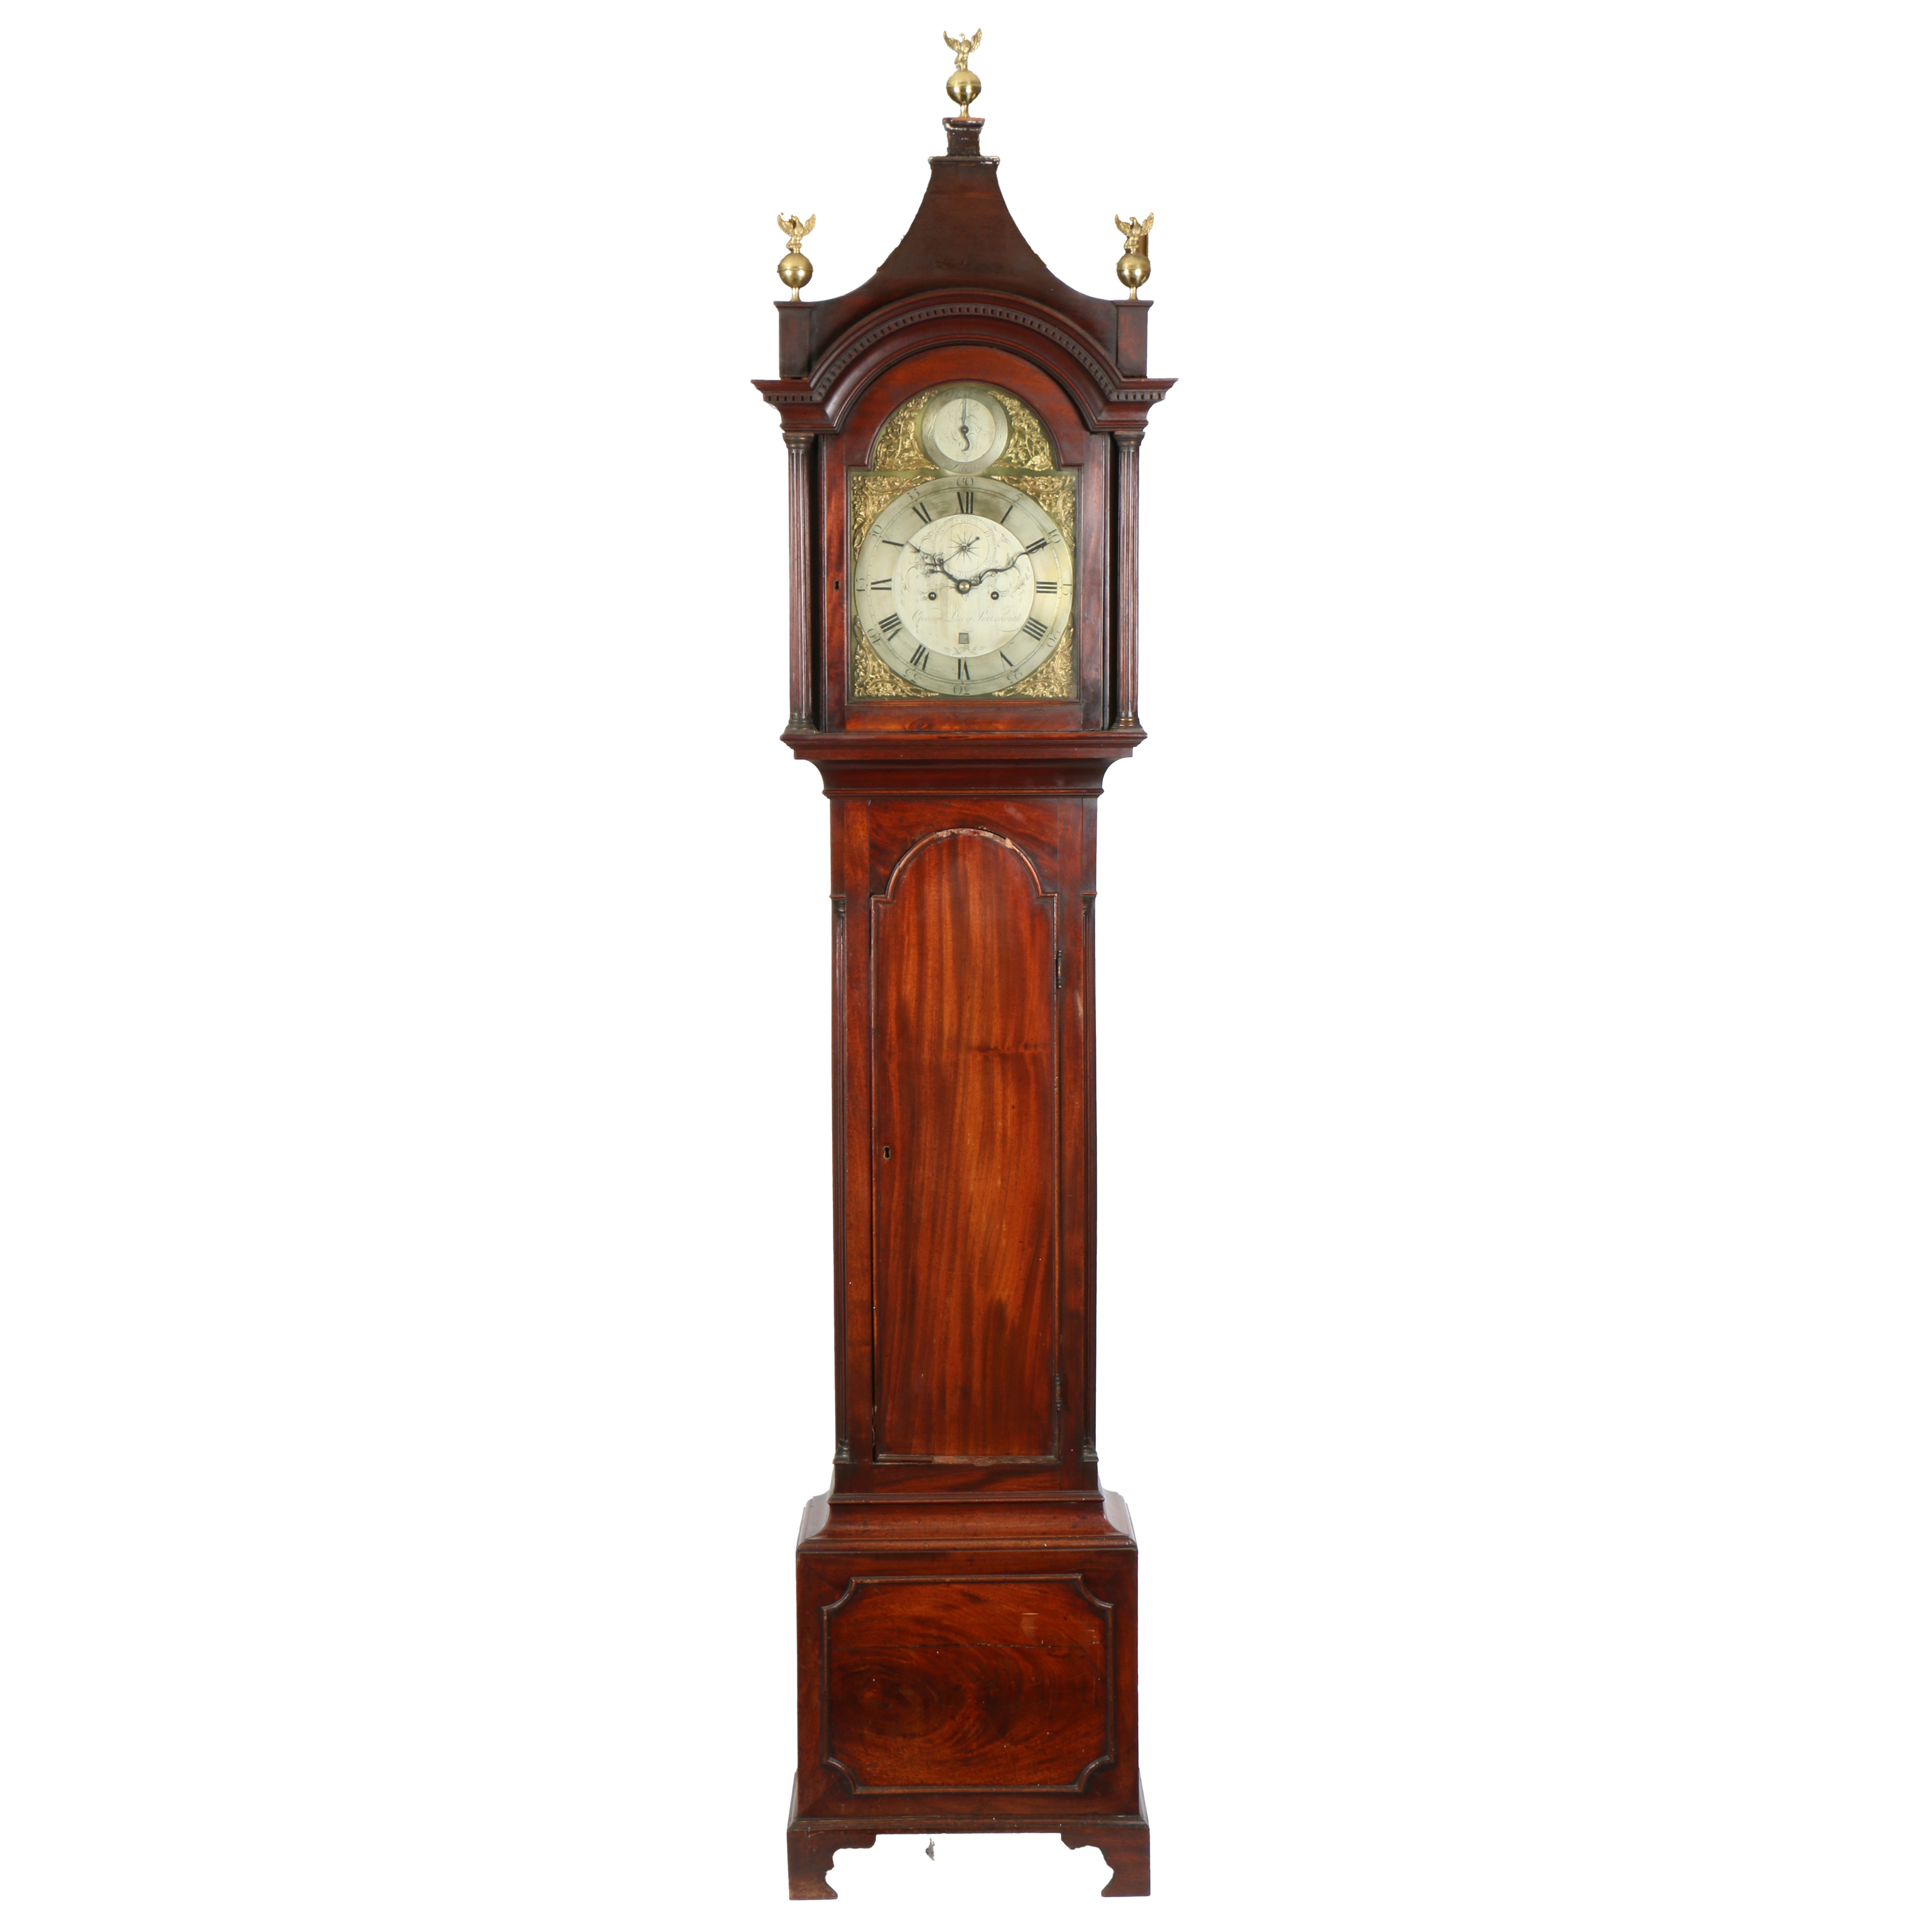 A LATE 18TH CENTURY MAHOGANY 8 DAY LONGCASE CLOCK BY GEORGE LACY OF PORTSMOUTH.